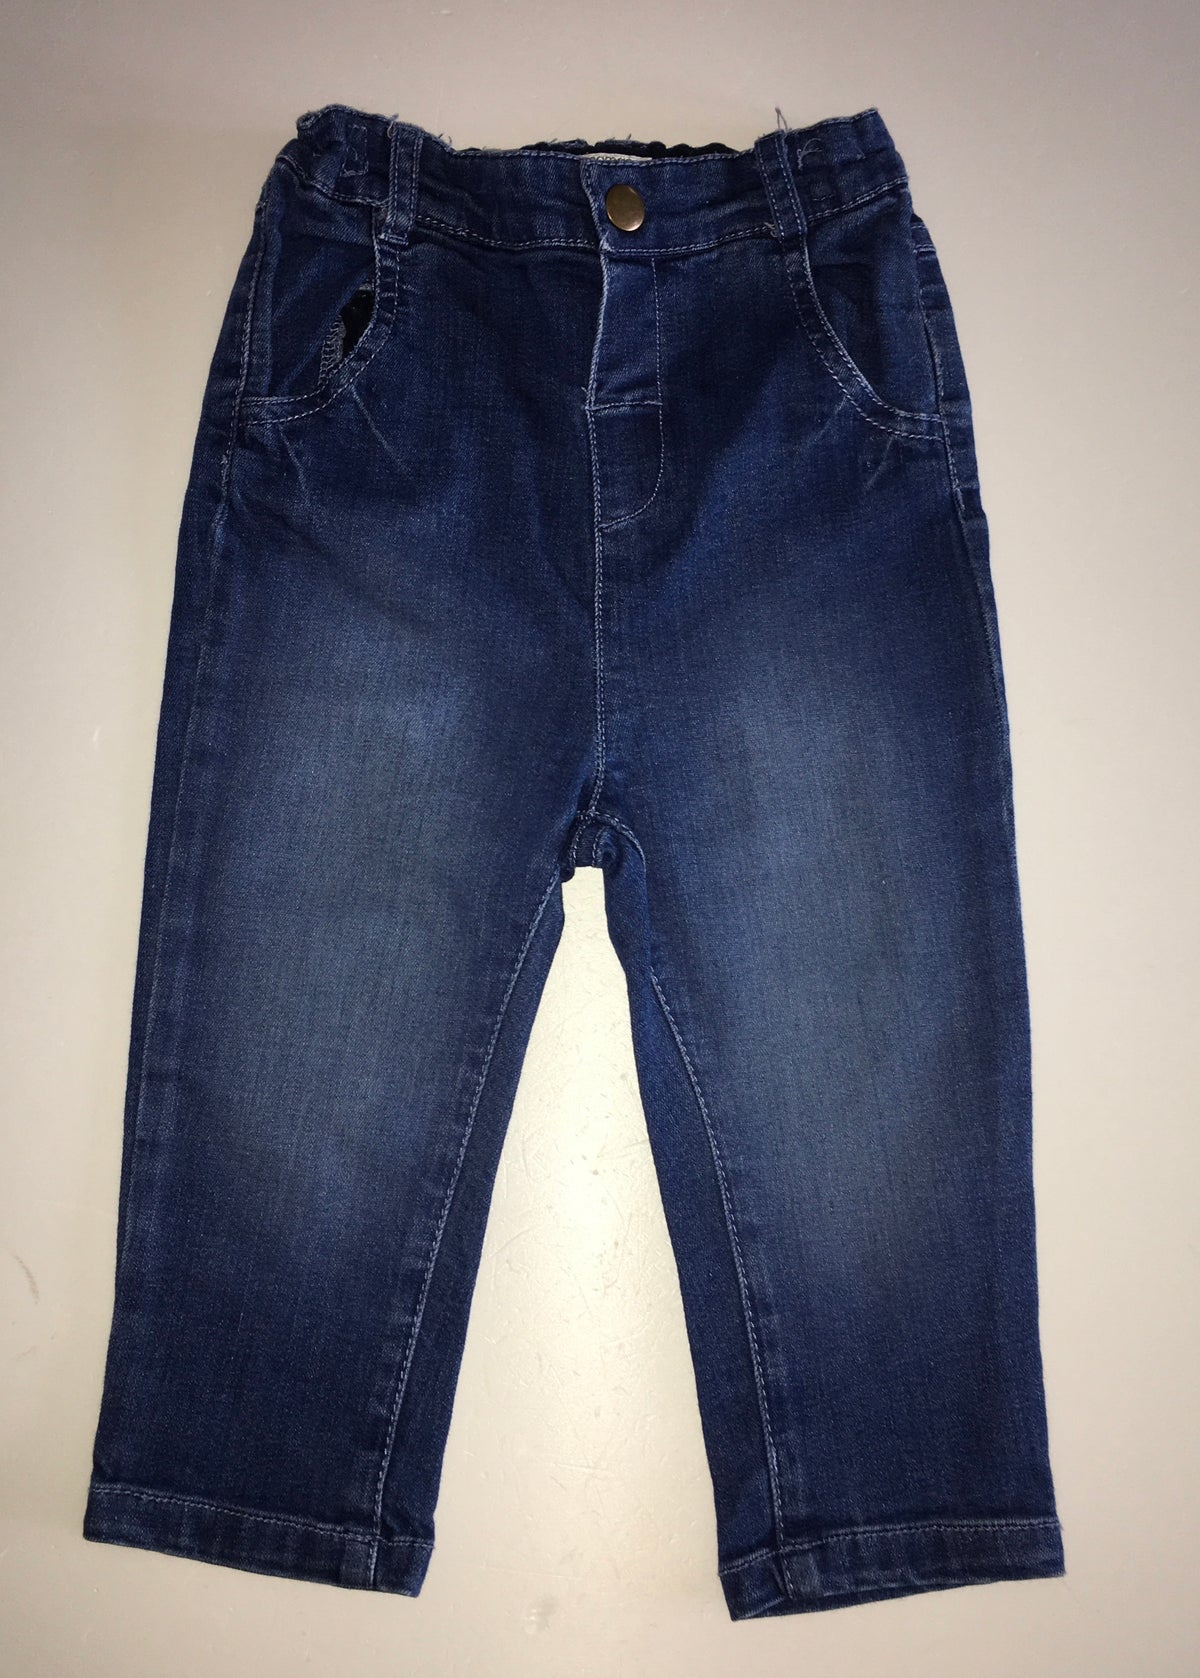 Mamas and Papas Jeans, Boys 12-18 Months